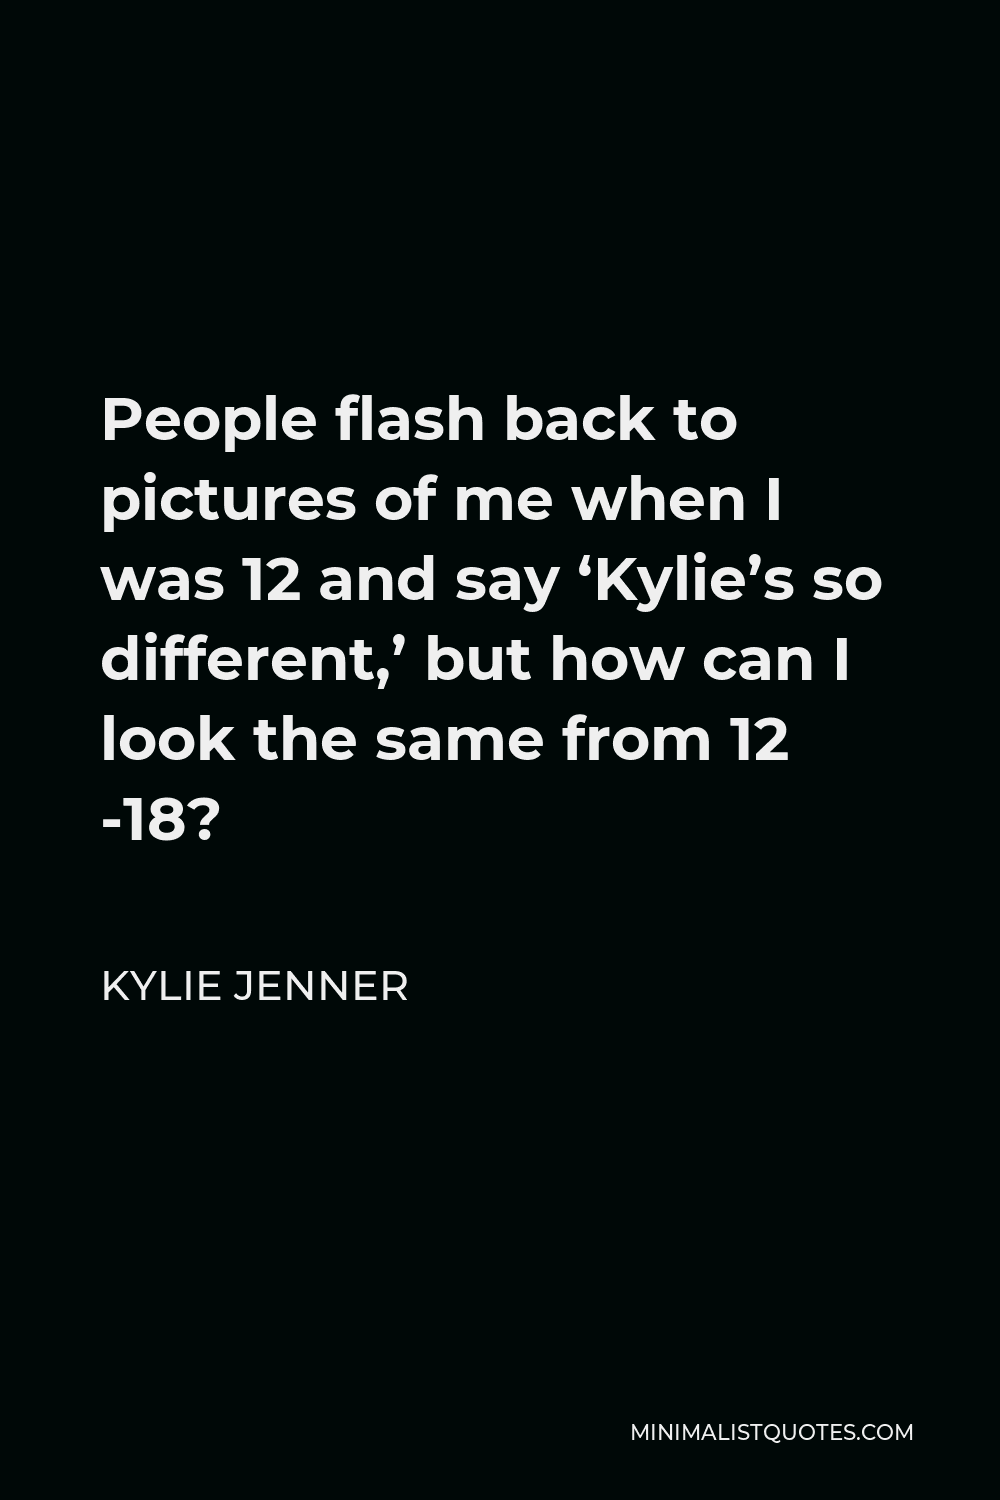 Kylie Jenner Quote - People flash back to pictures of me when I was 12 and say ‘Kylie’s so different,’ but how can I look the same from 12 -18?